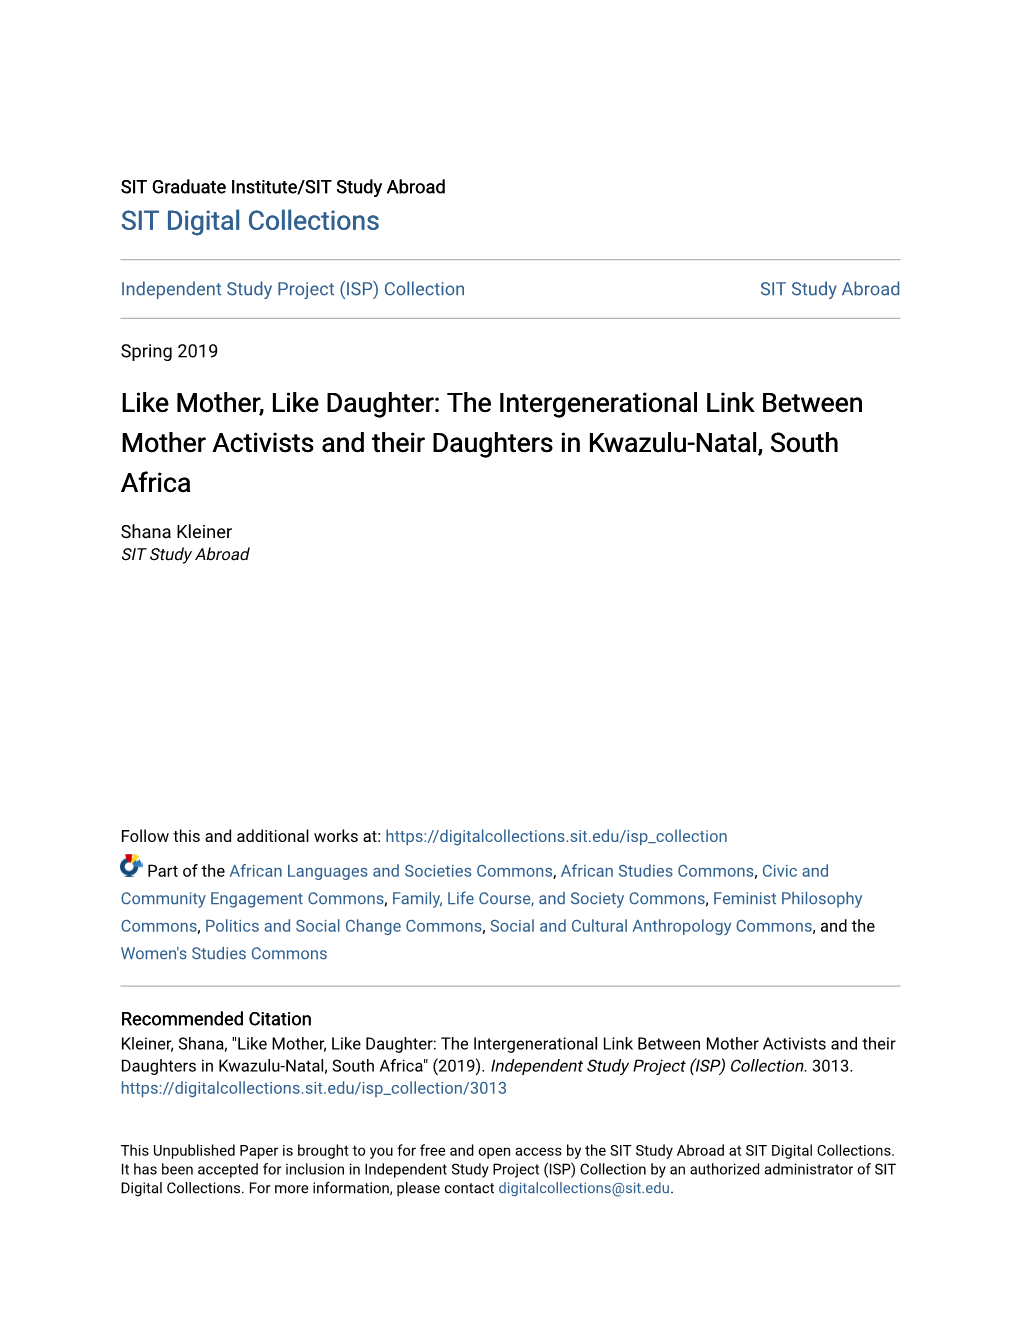 The Intergenerational Link Between Mother Activists and Their Daughters in Kwazulu-Natal, South Africa